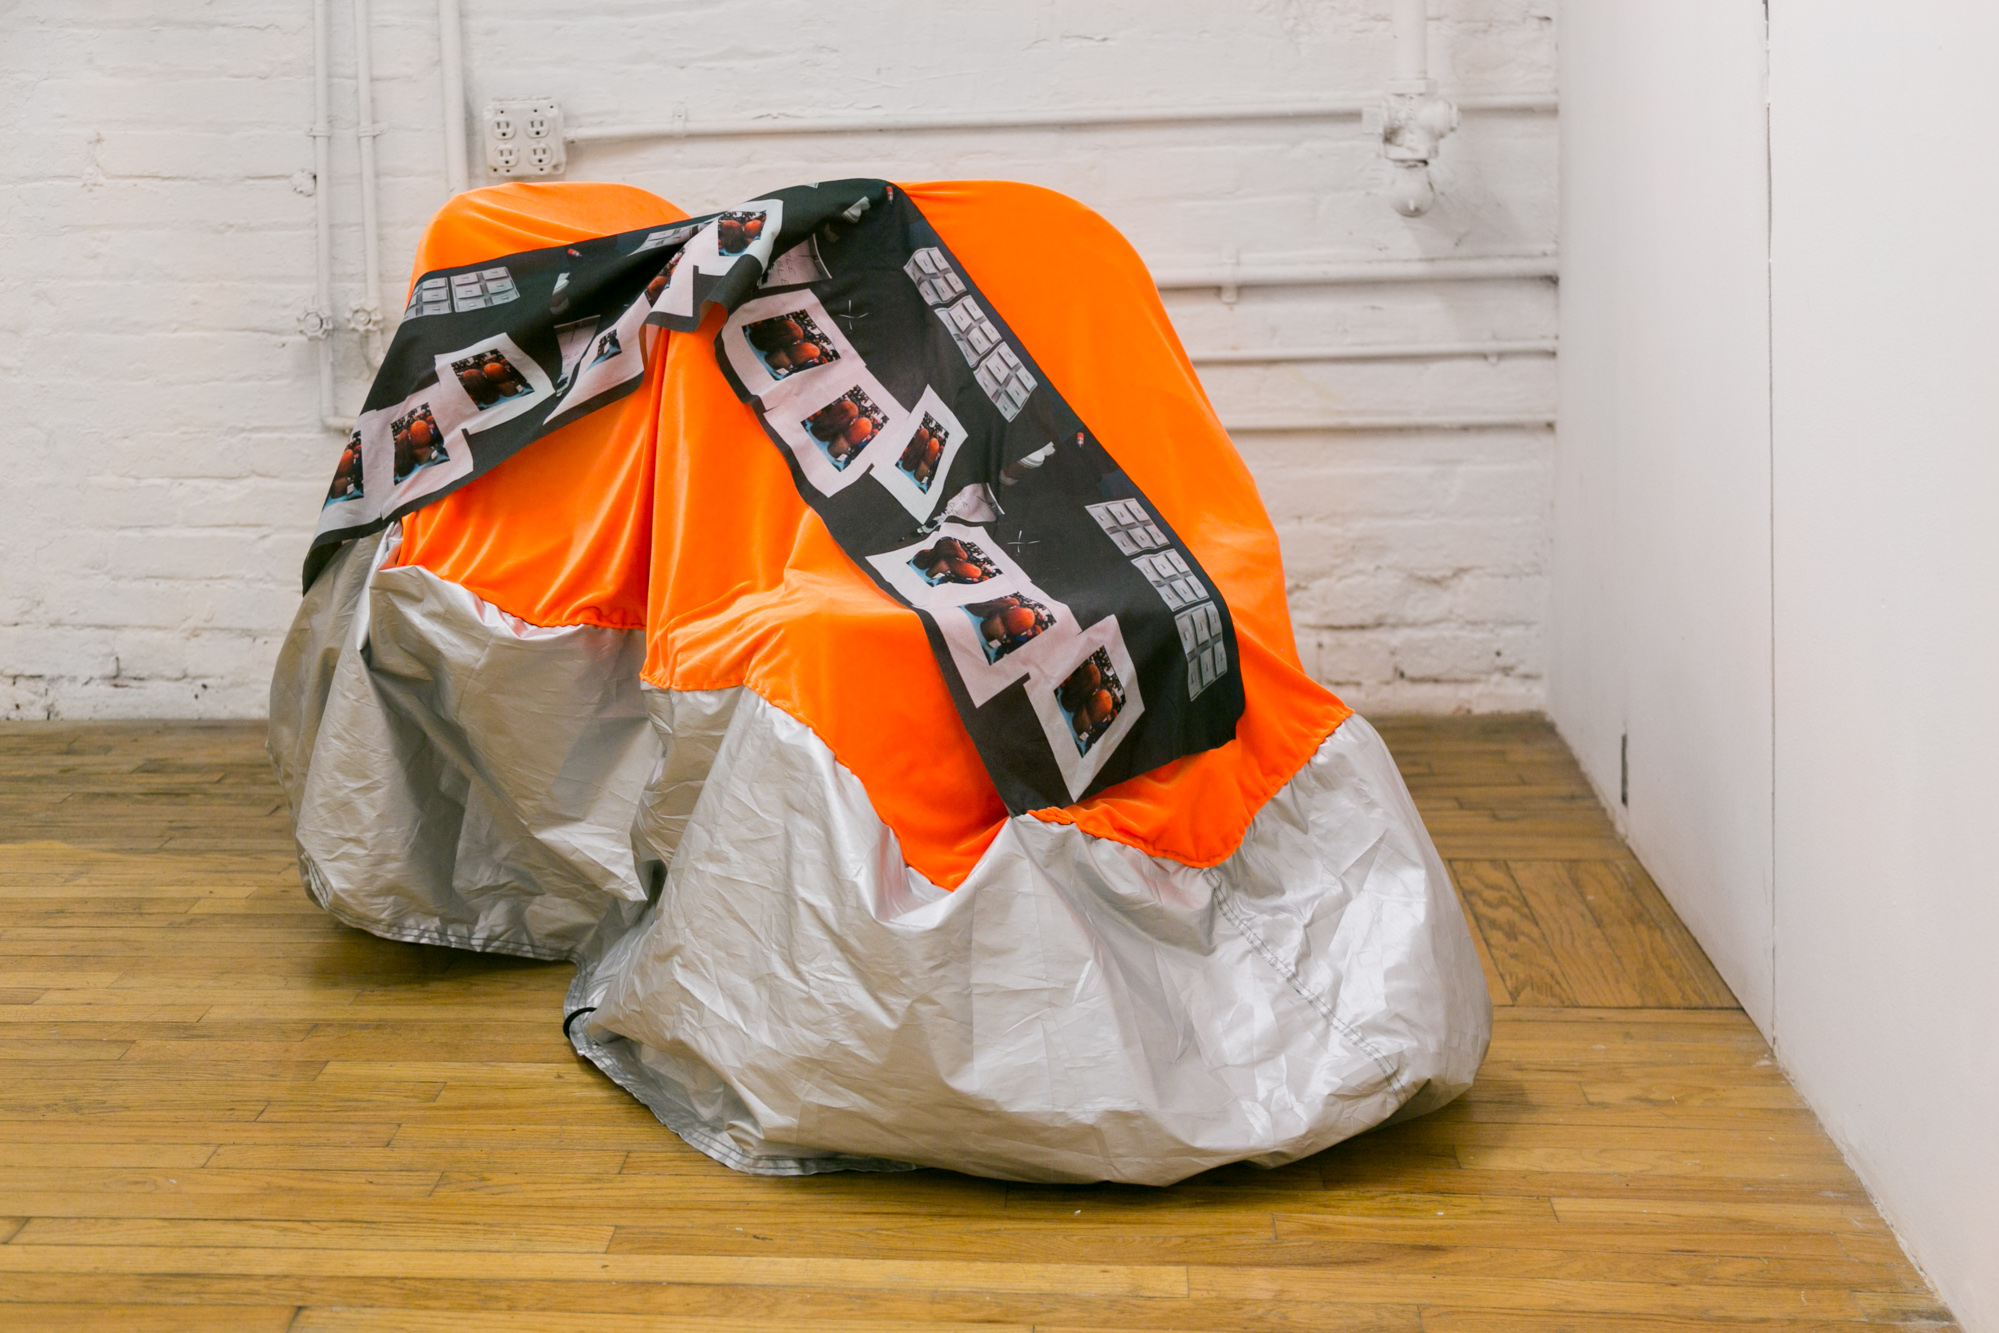  Laura Hunt,  Motorcycle Cover 2 , 2018, custom printed cotton, velvet, and altered motorcycle cover with hand-sewing, approximately 60 x 36 inches, dimensions variable. Installation view, Laura Hunt,  Motorcycle Covers , 2018, 321 Gallery, Brooklyn,